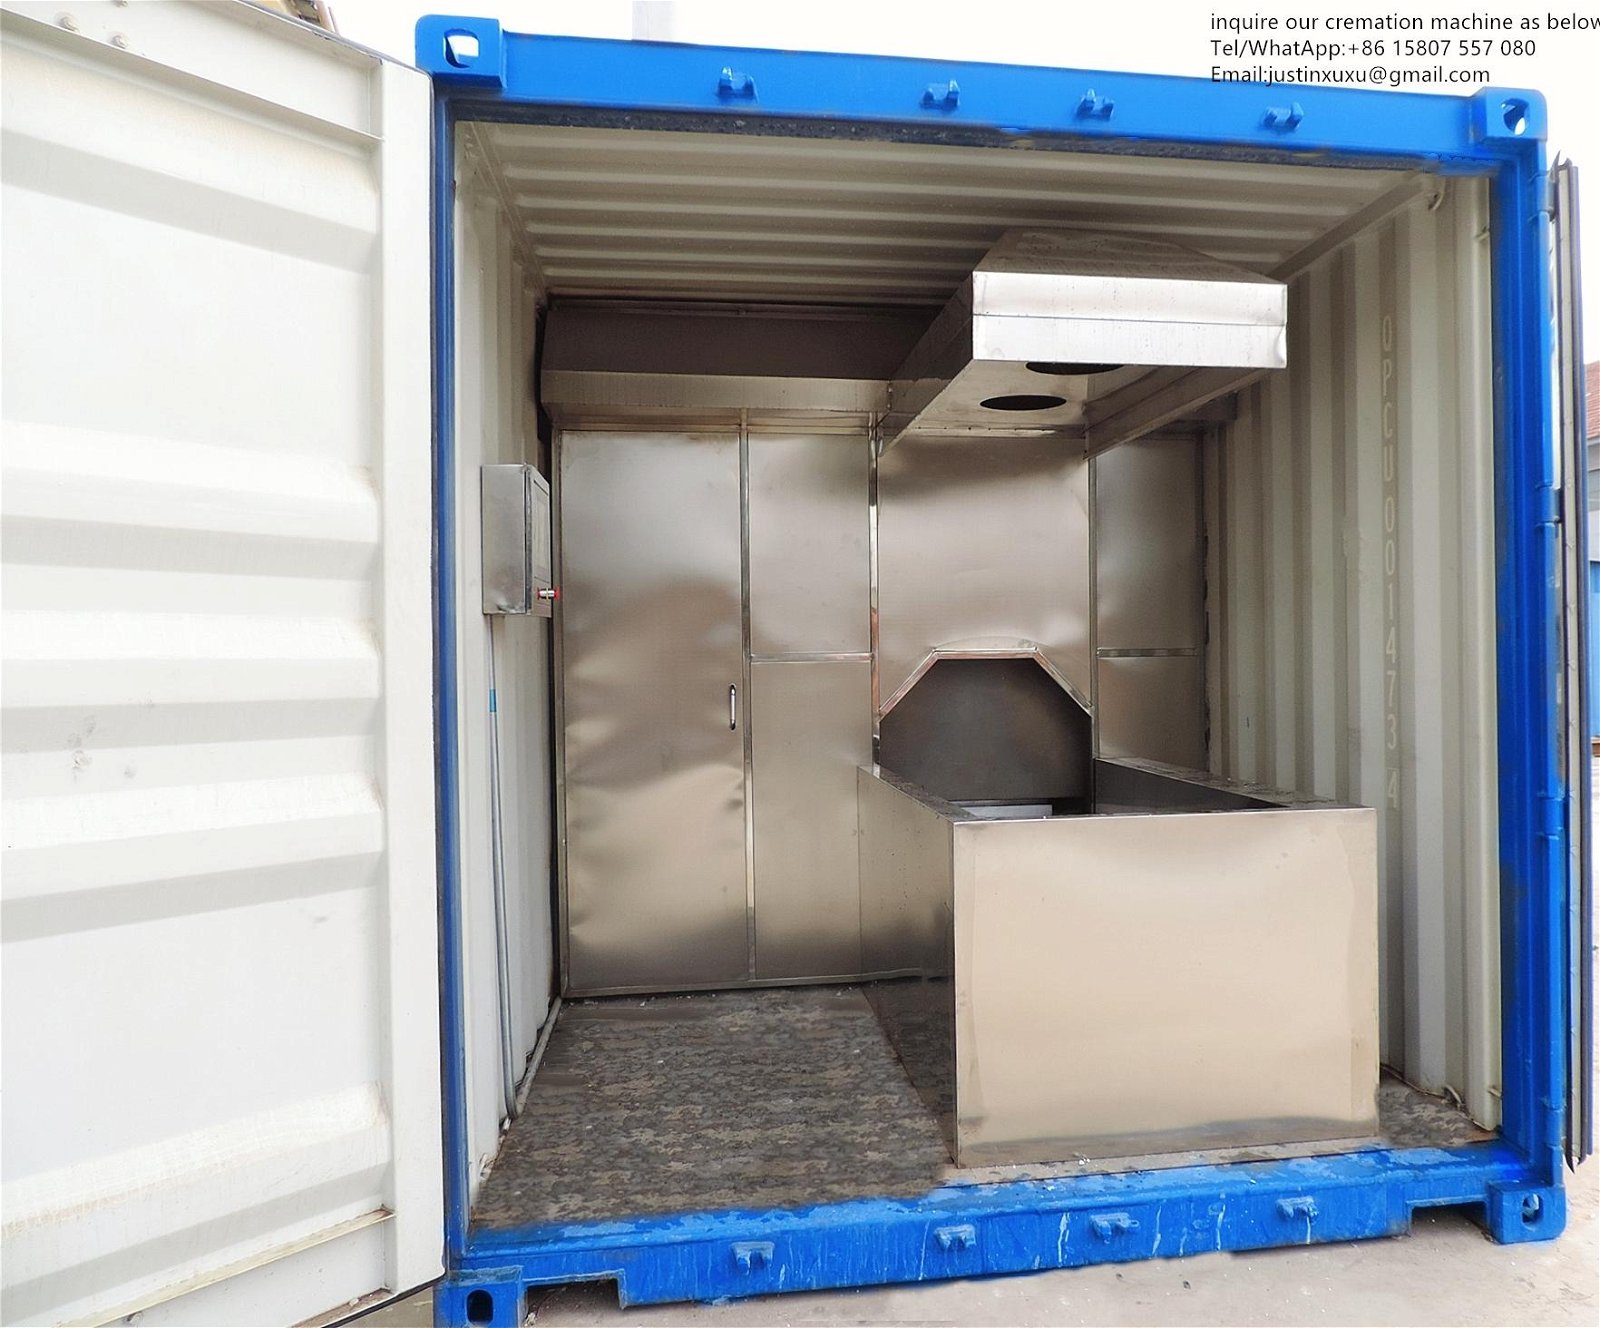 moving container furnaces for cremation designed human  for Malaysia market  